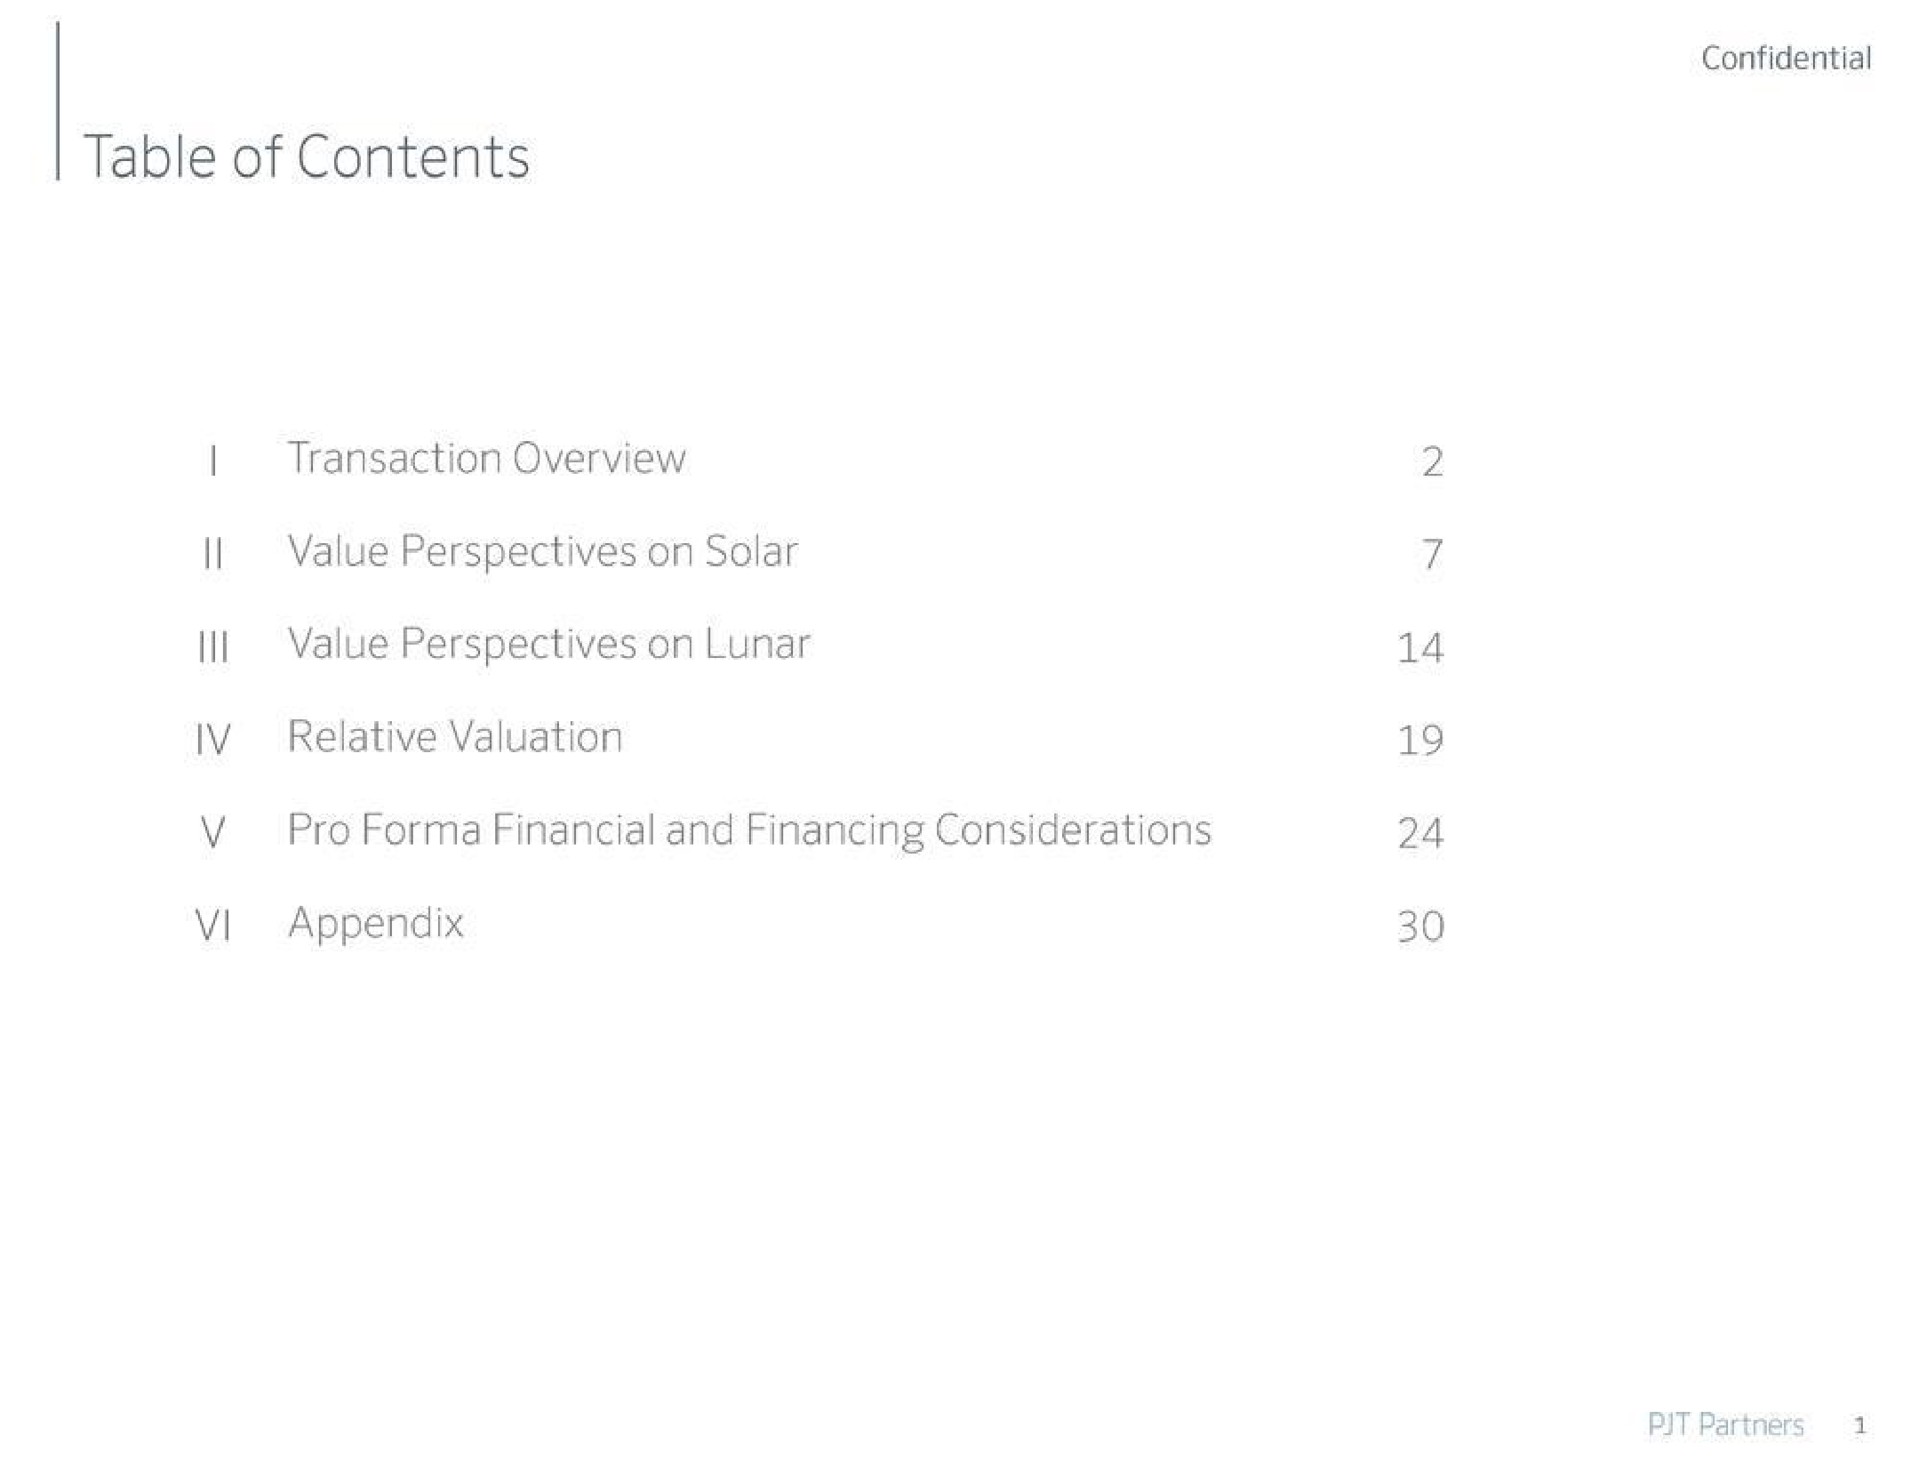 table of contents ill transaction overview value perspectives on solar value perspectives on lunar relative valuation pro financial and financing considerations appendix | PJT Partners